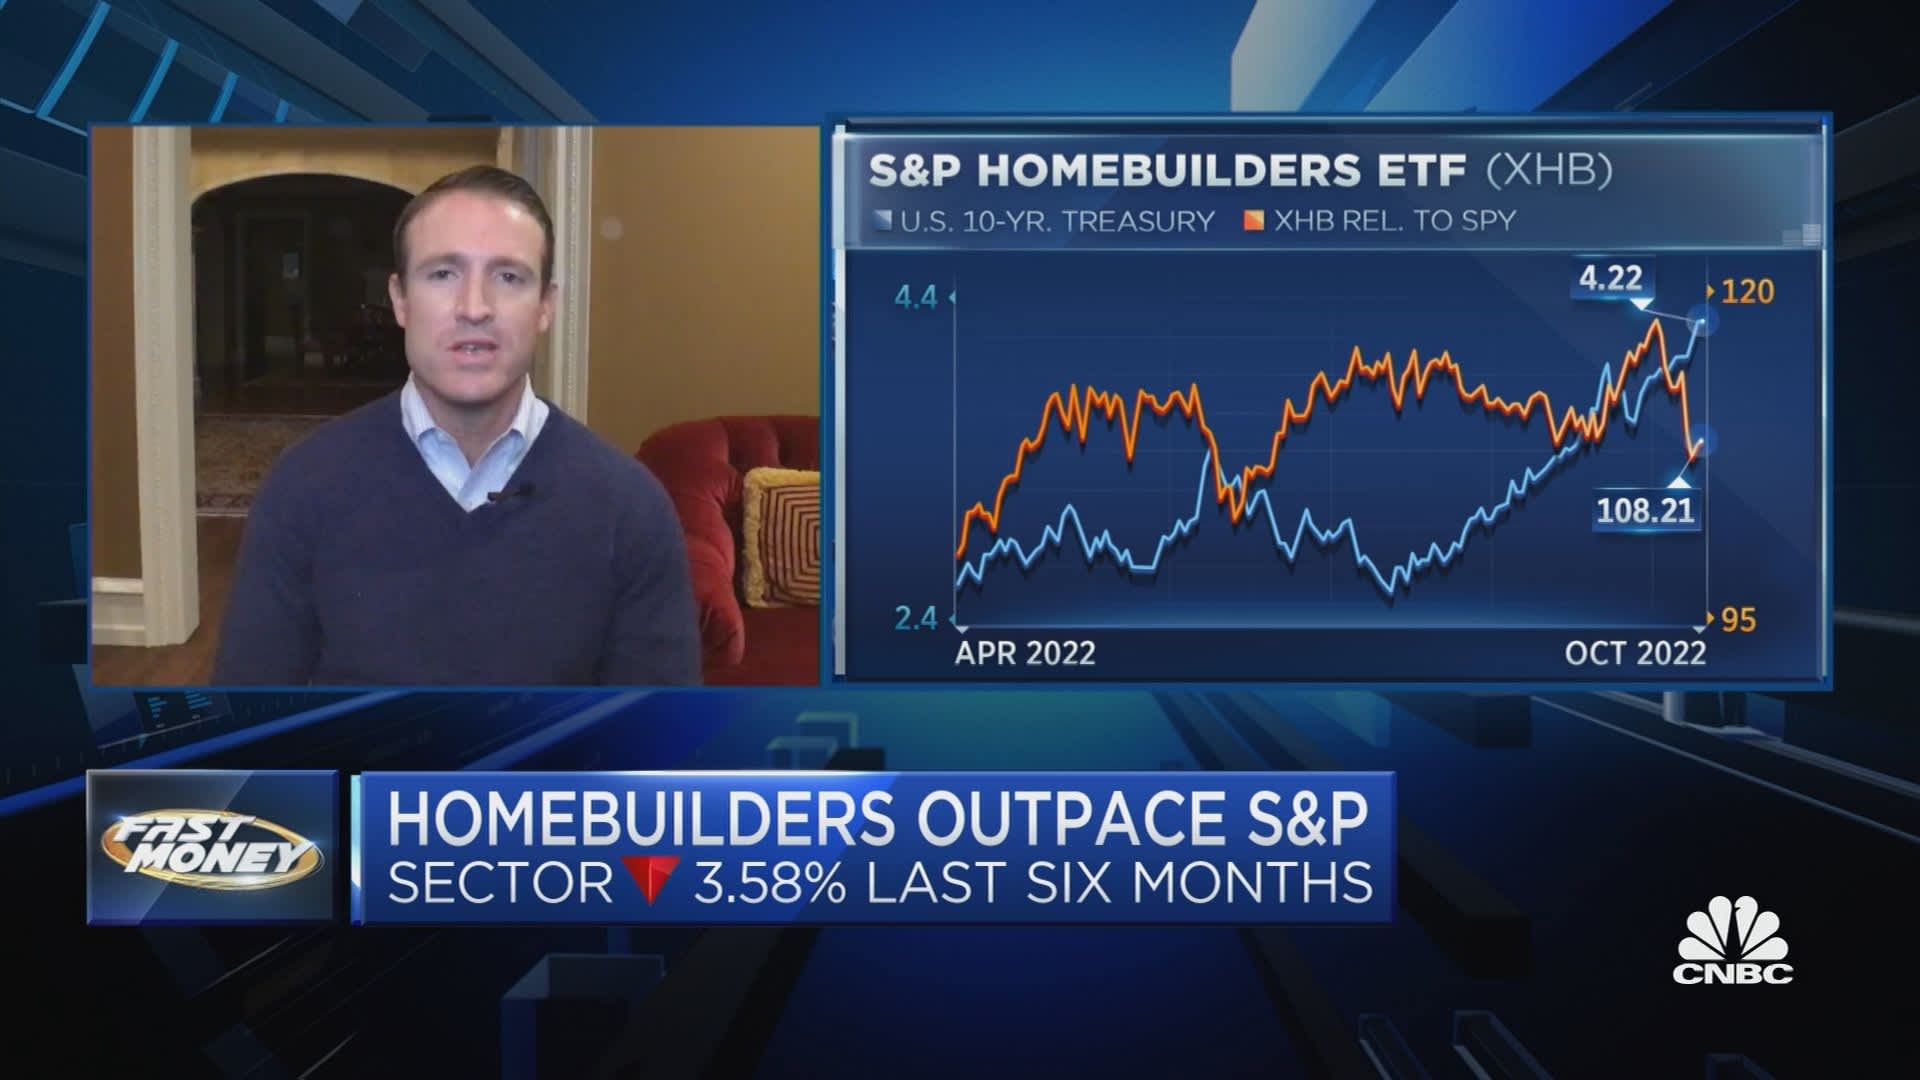 Homebuilders outperform over the past six months